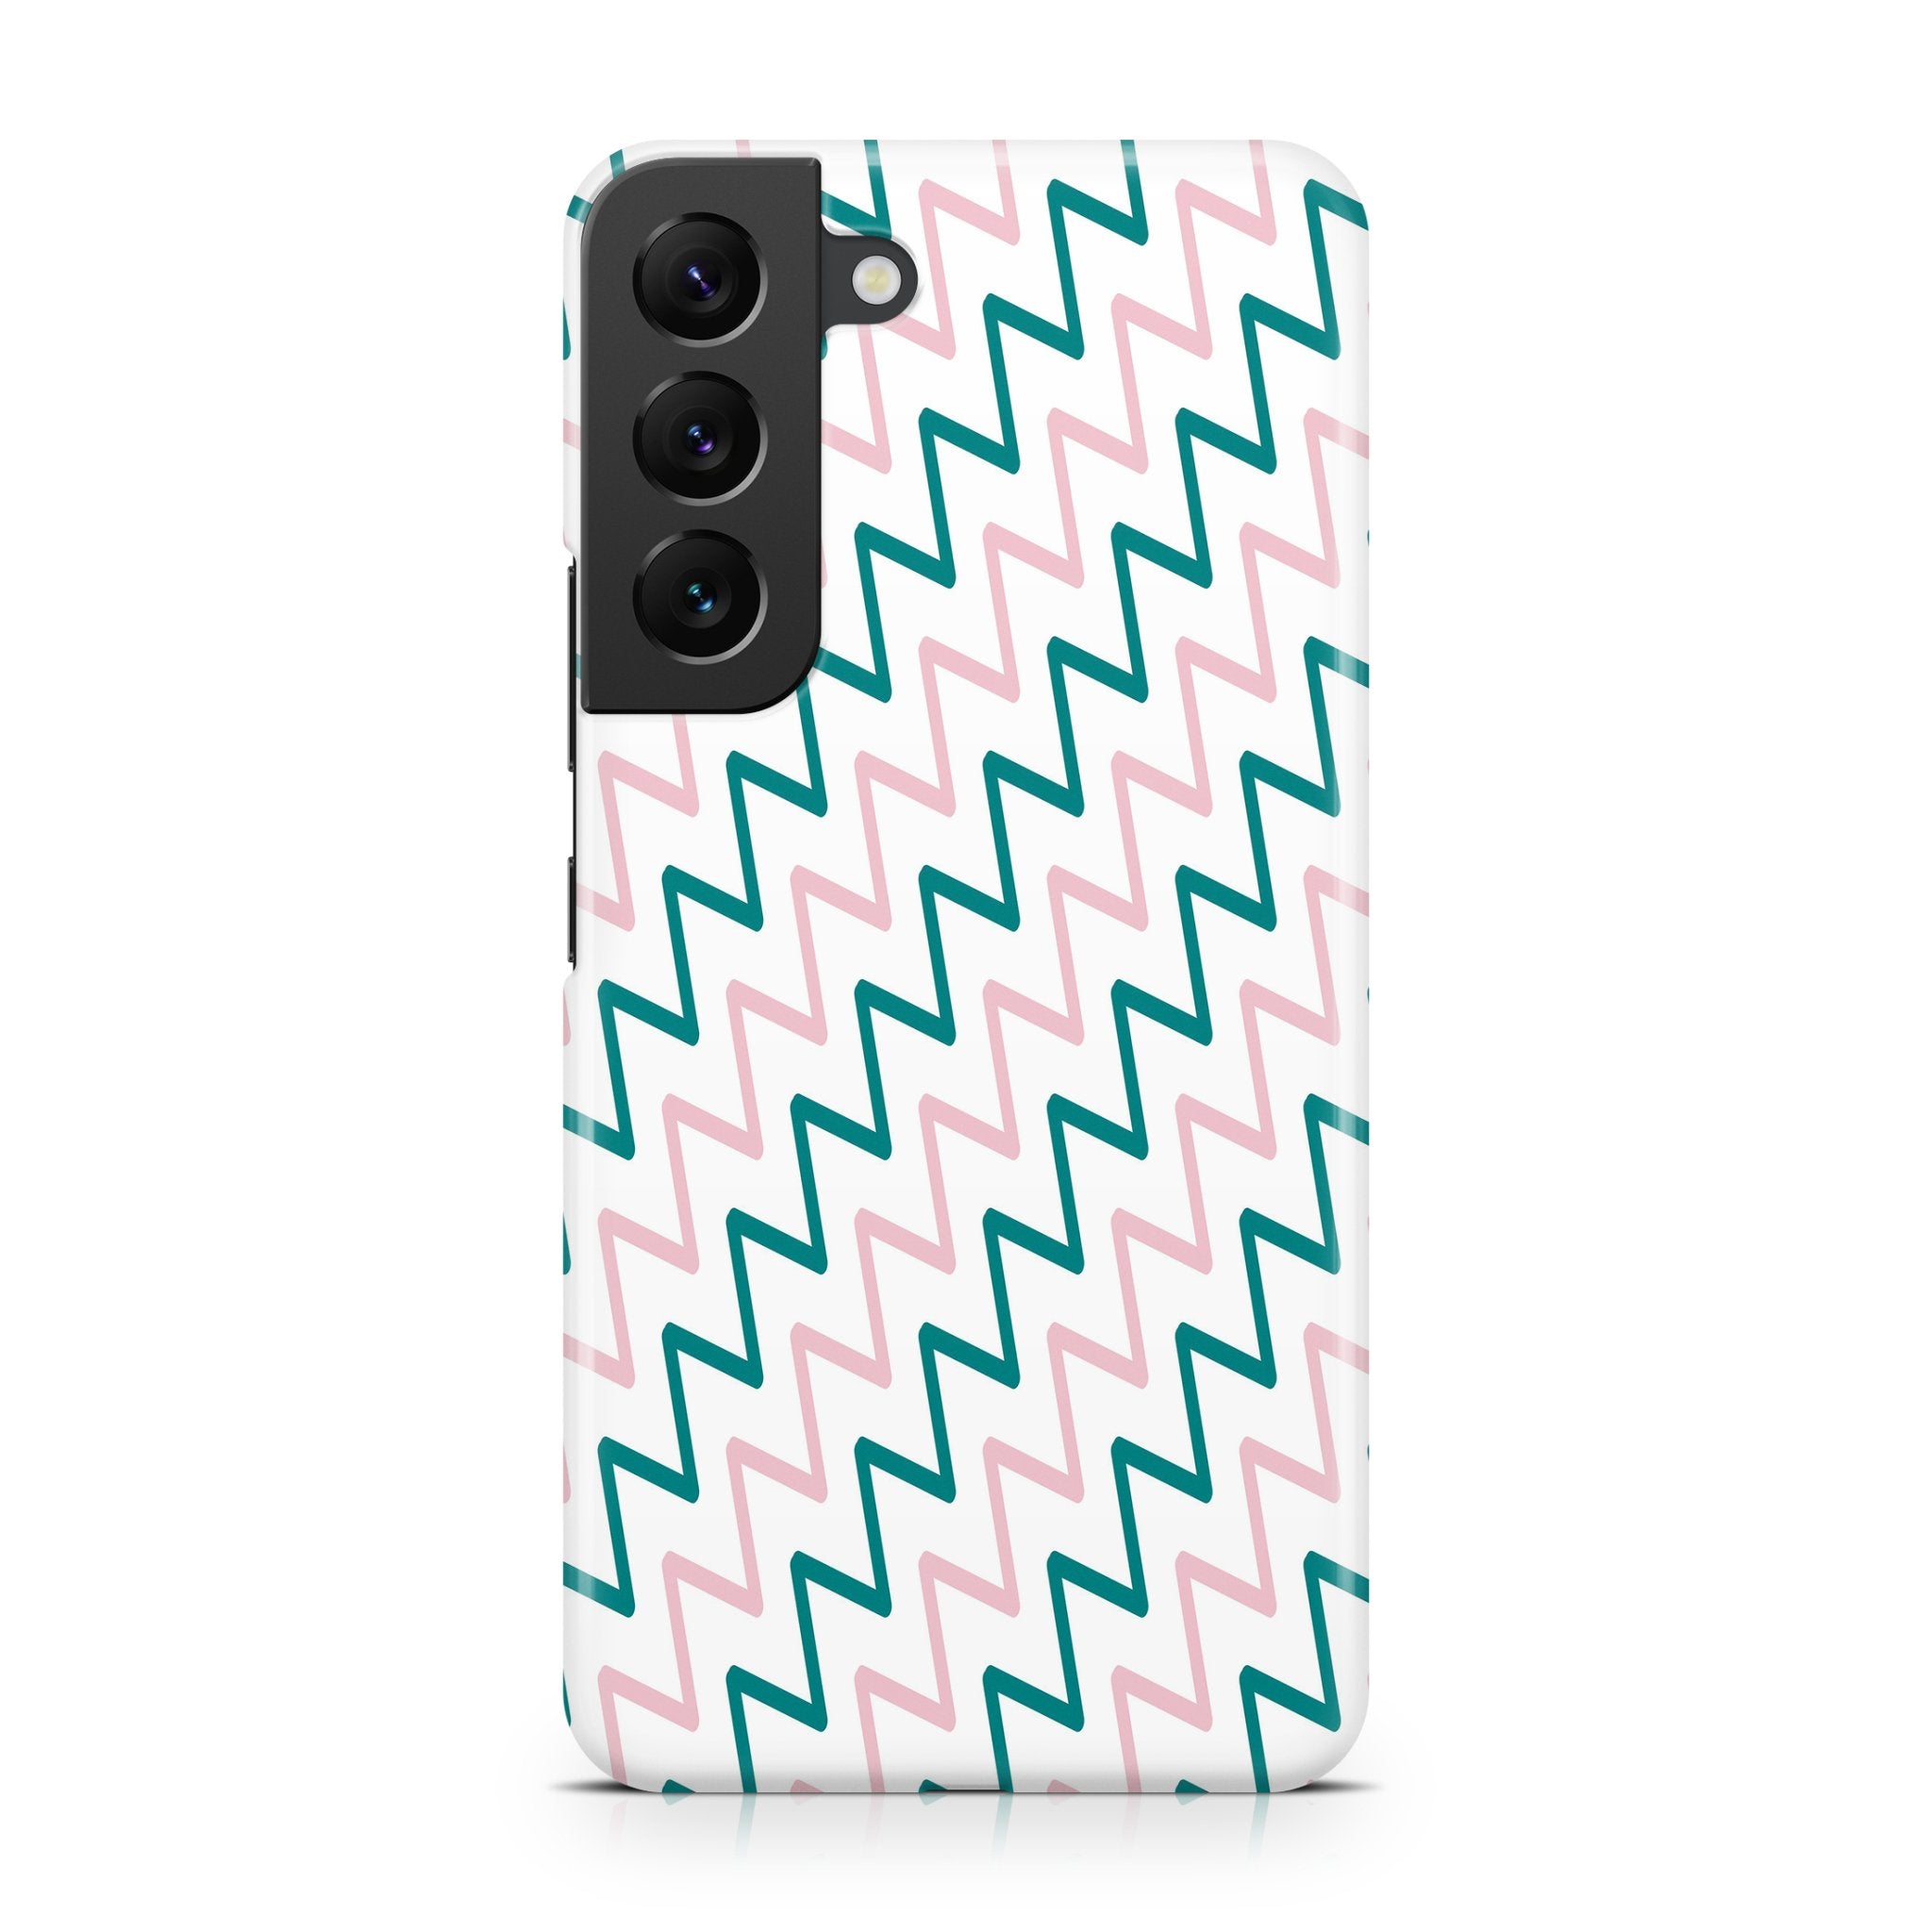 Vibrant Harmonies - Samsung phone case designs by CaseSwagger